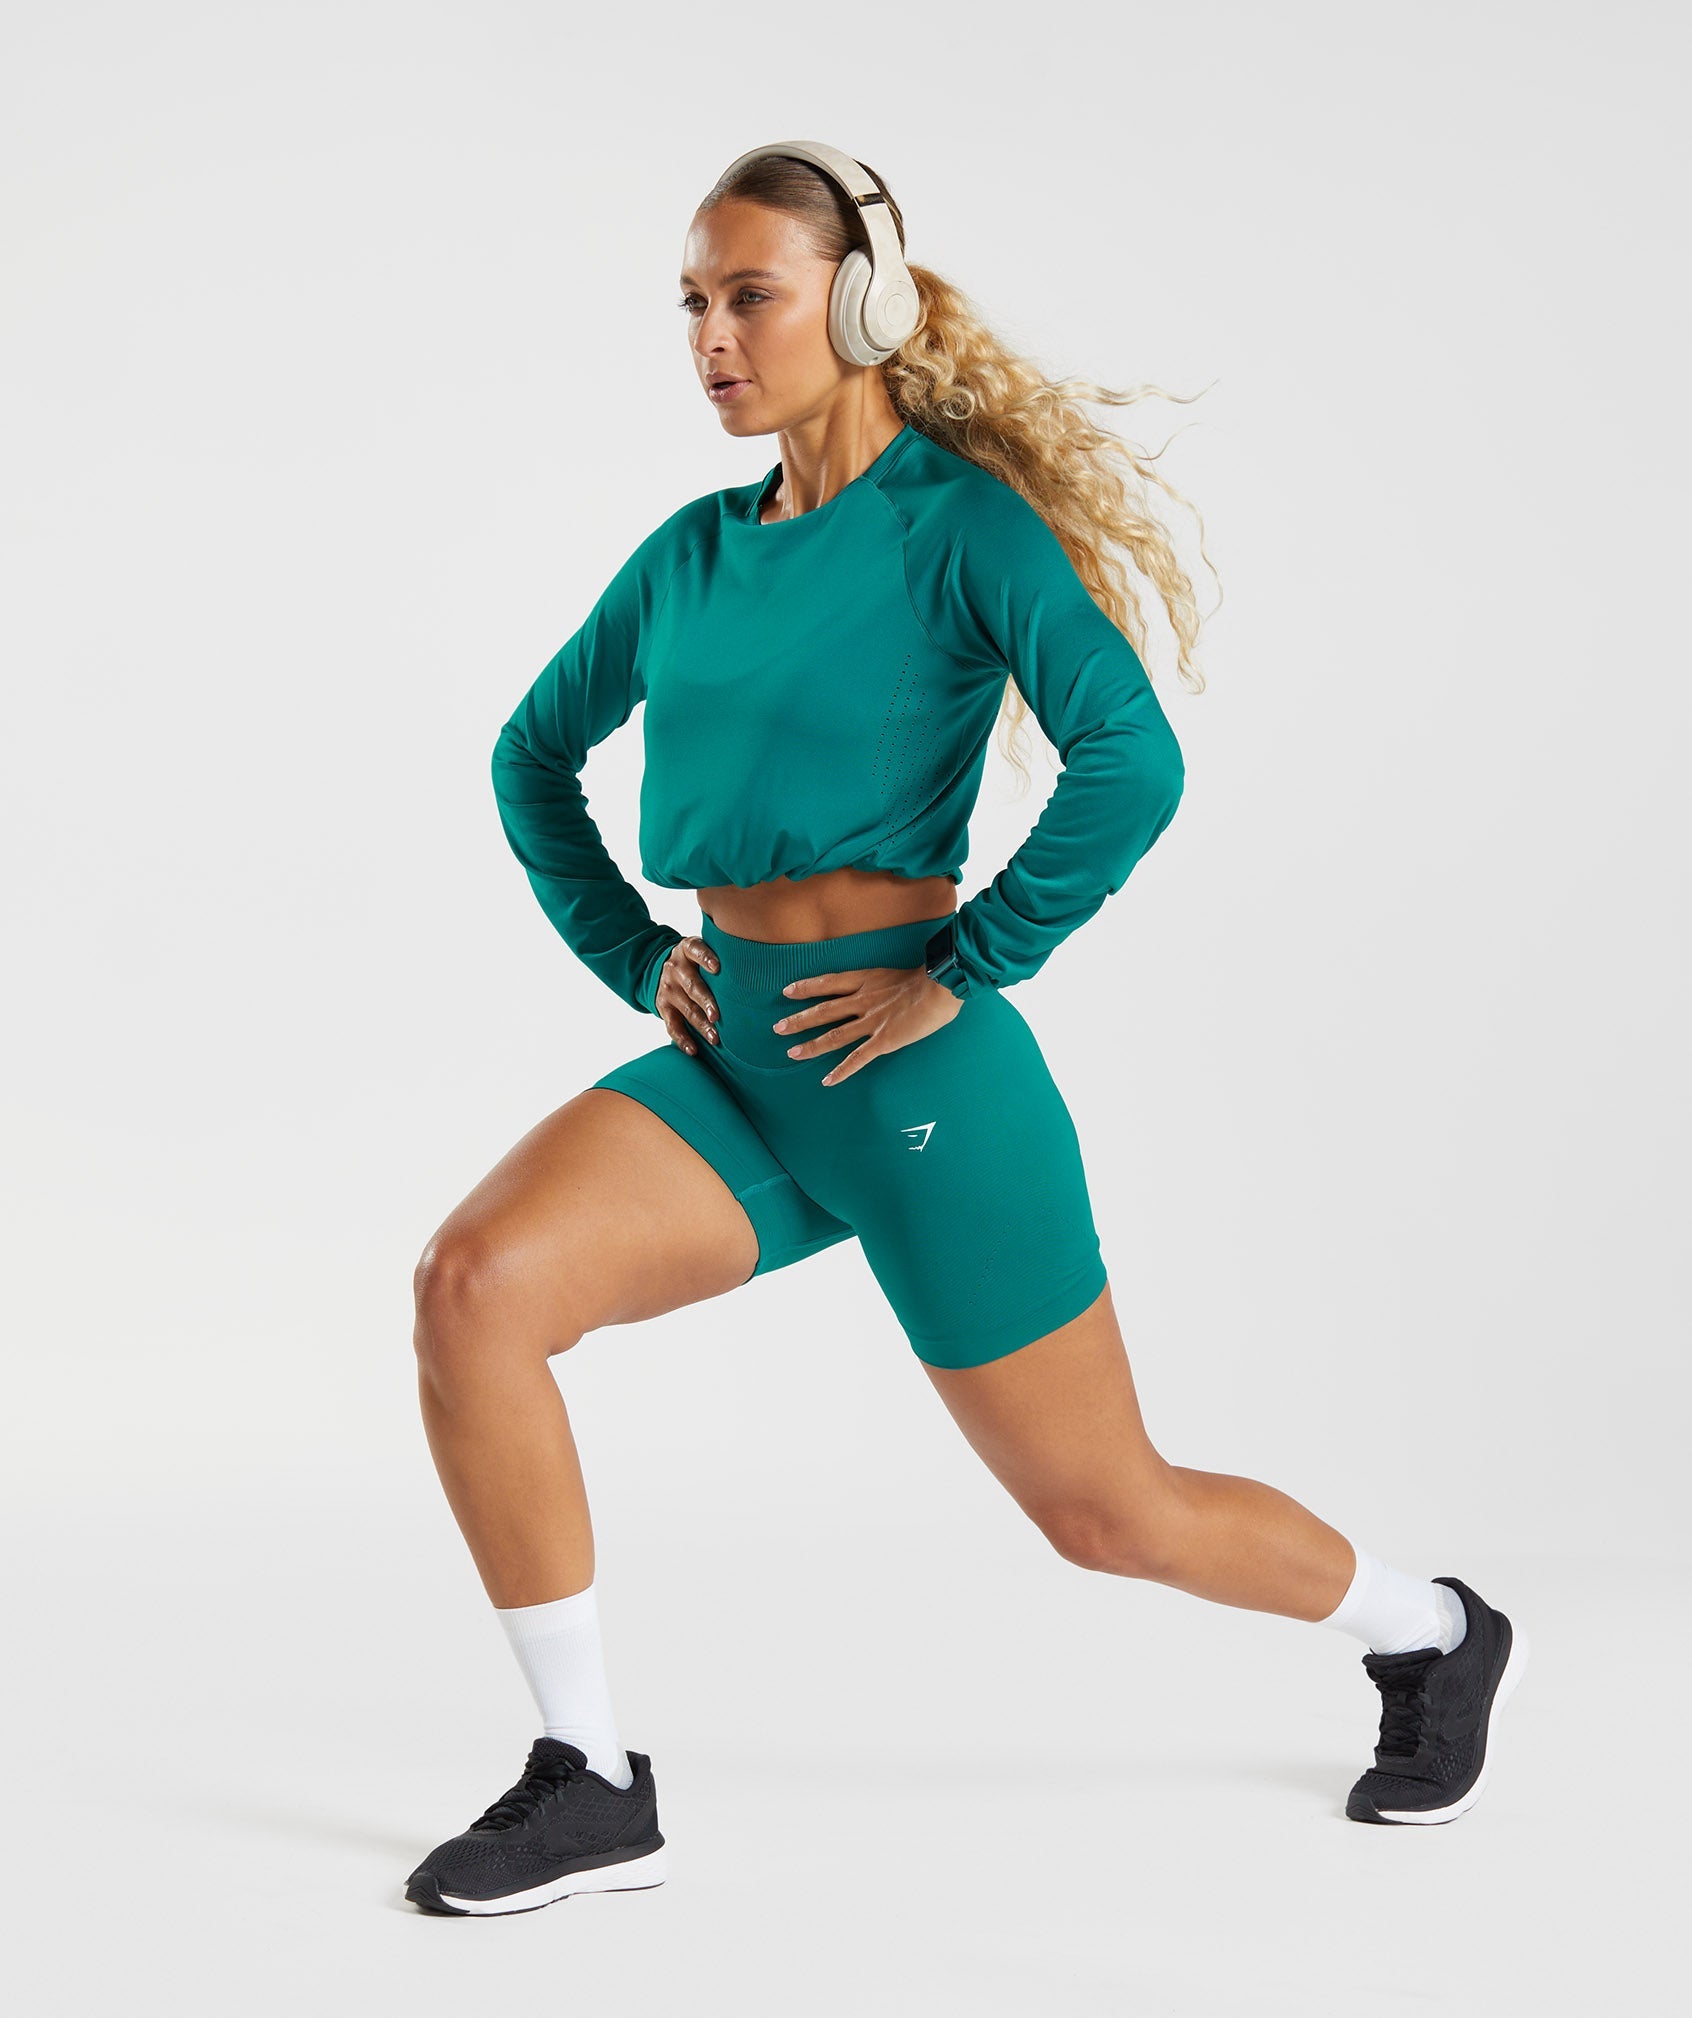 Sweat Seamless Sculpt Shorts in Rich Teal - view 4